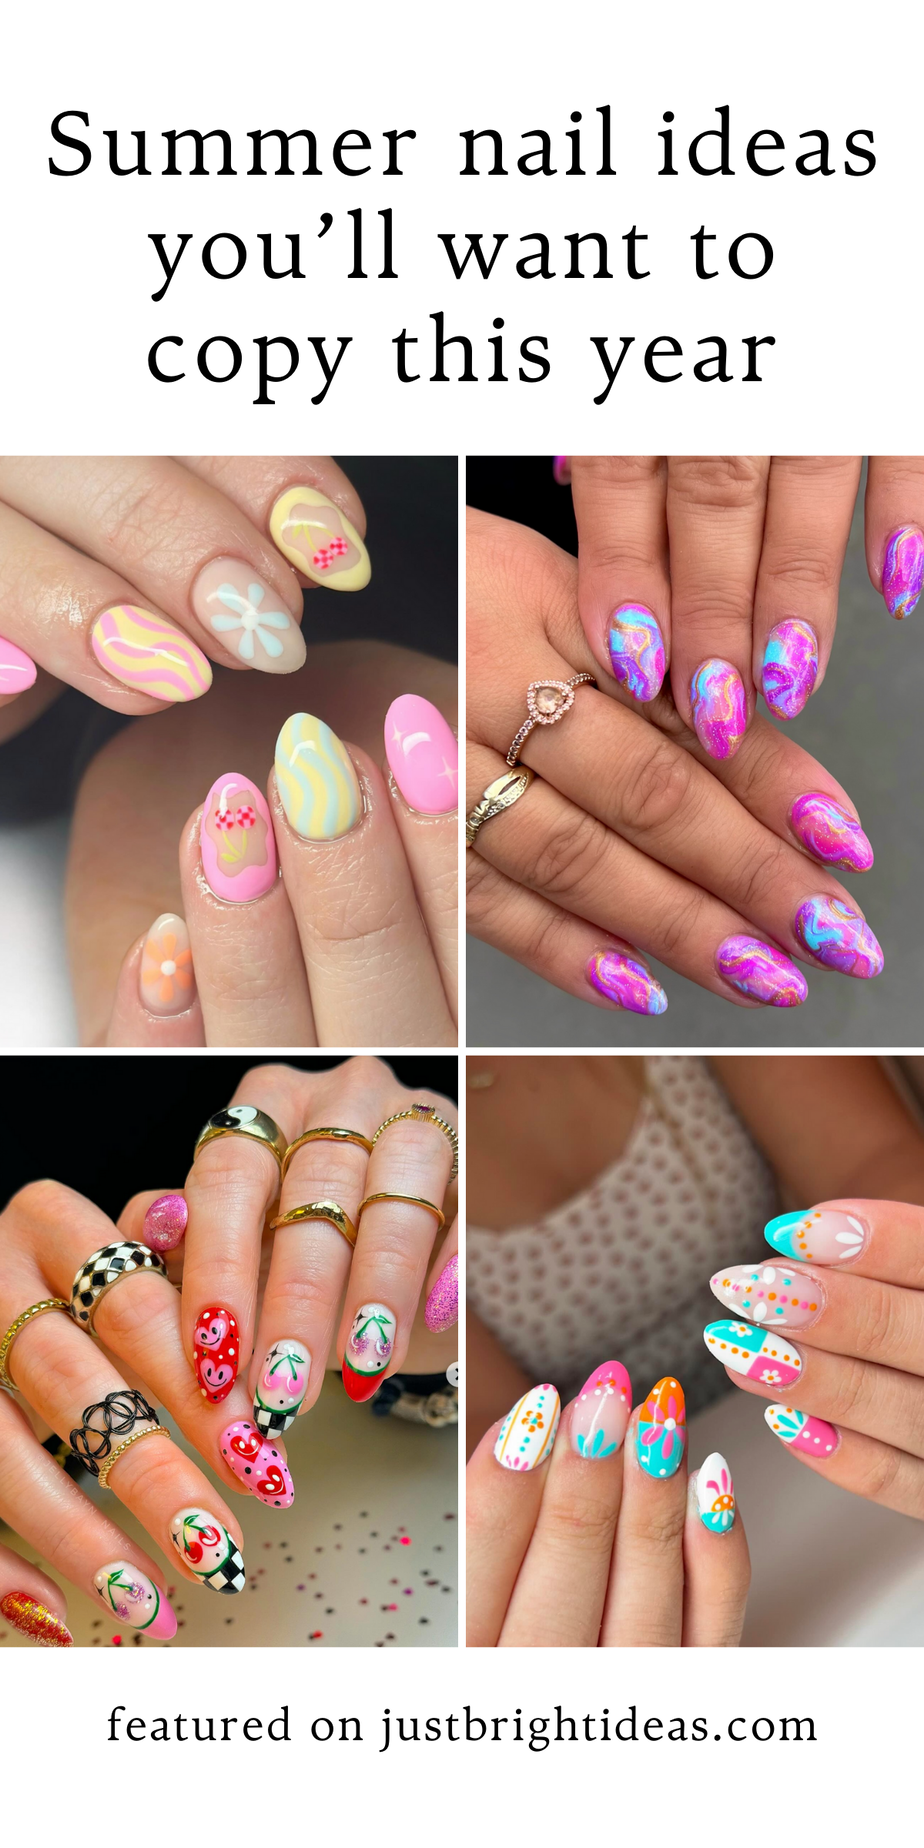 Summer nails are here to slay! 💅☀️ Loving these vibrant colors and fun designs. Who else is ready for a nail makeover?🌸💖